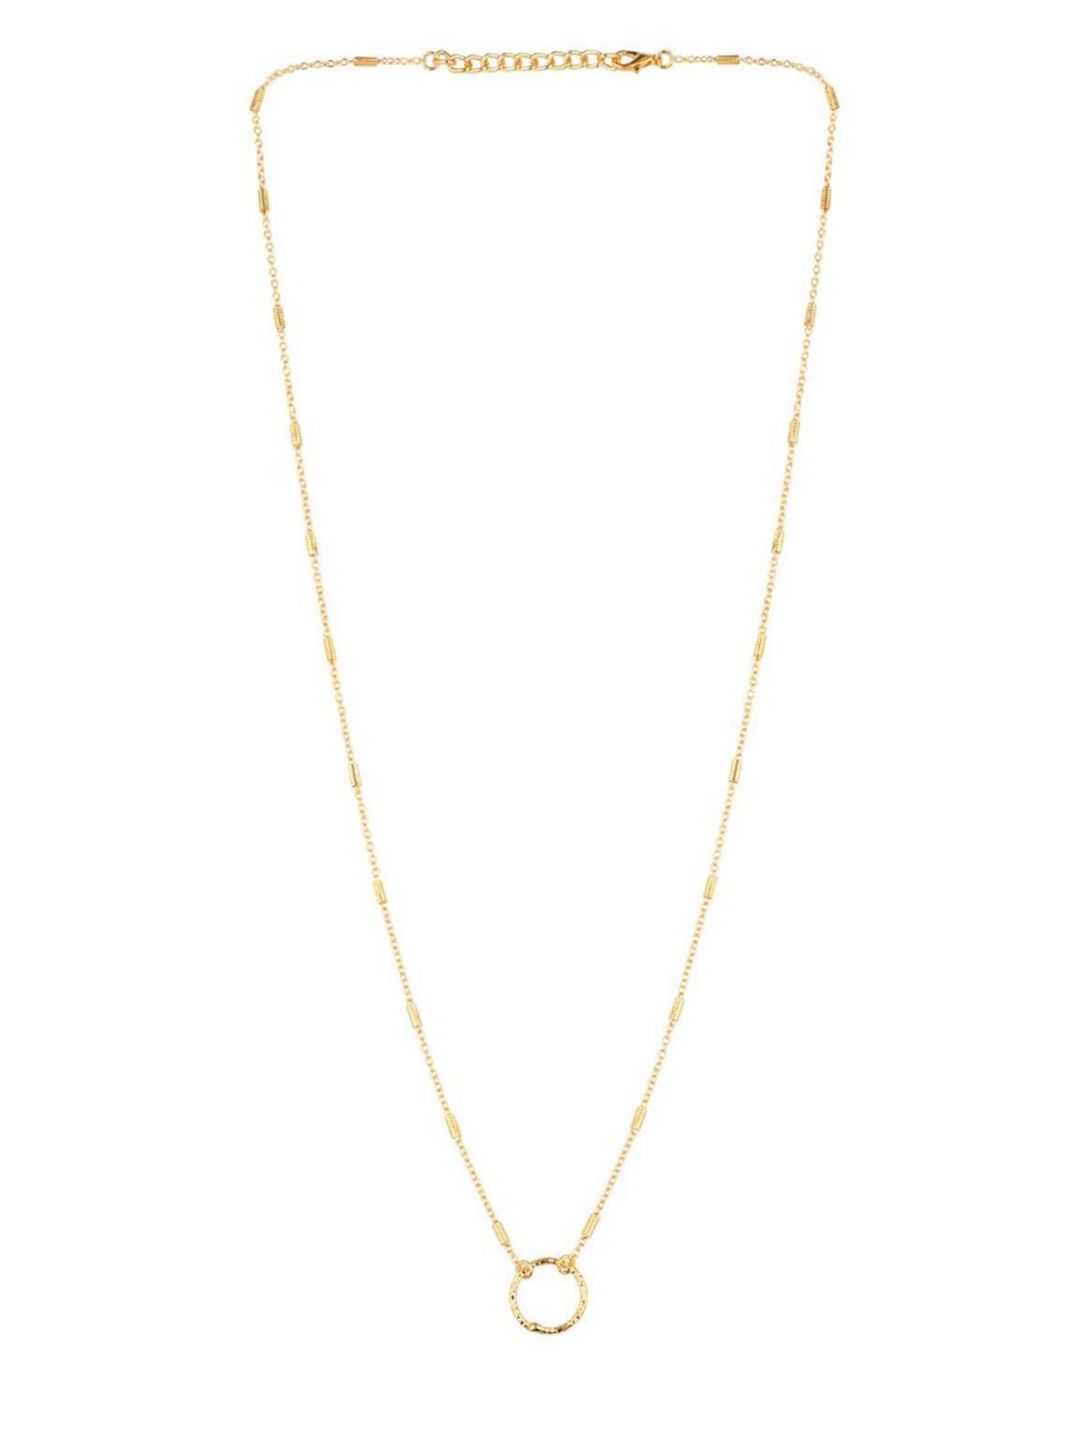 Efulgenz Gold-Plated Chain Price in India